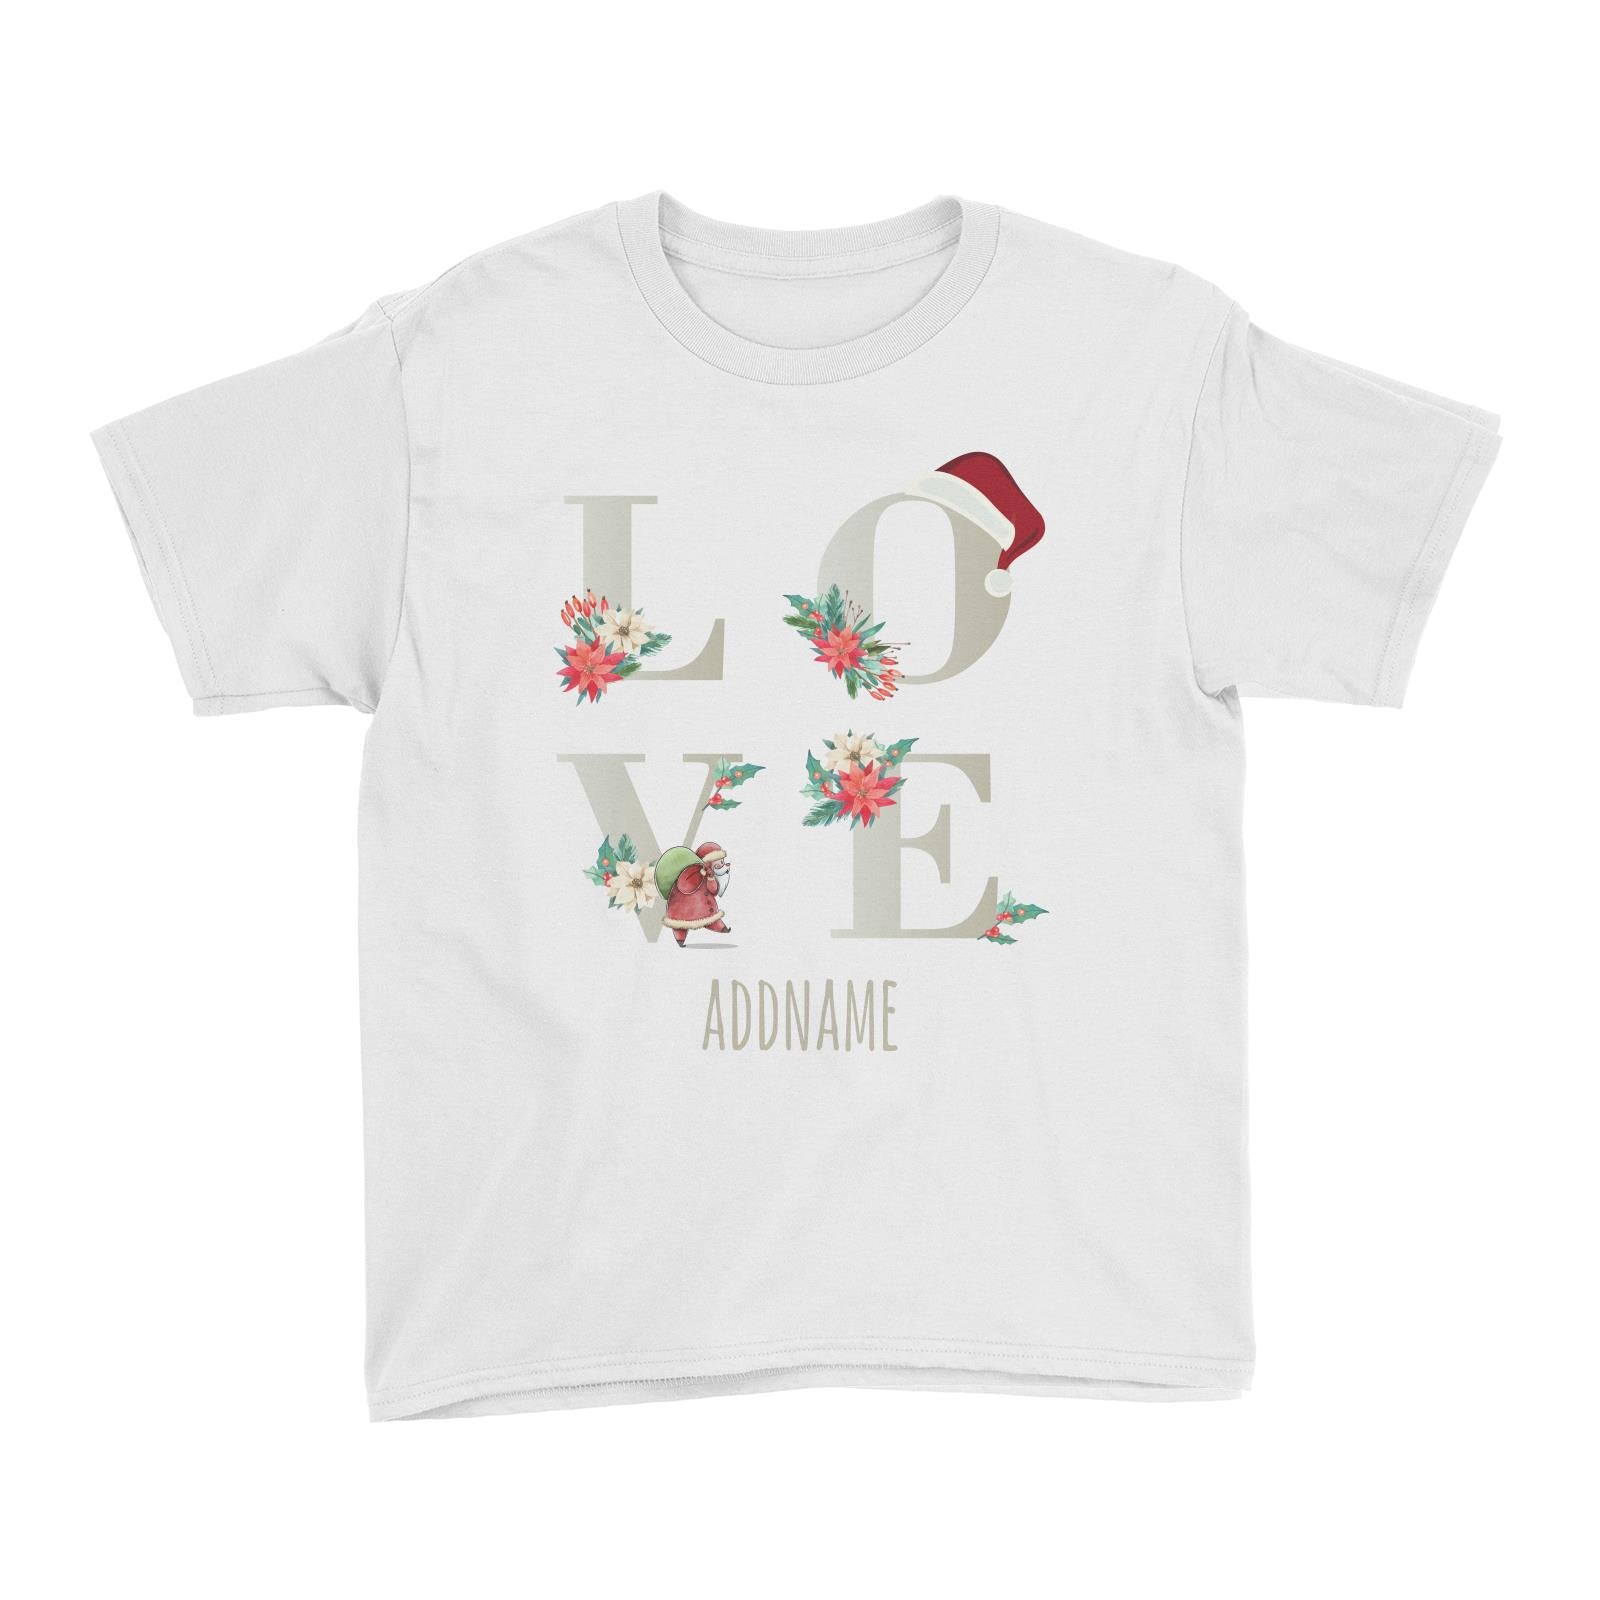 LOVE with Christmas Elements Addname Kid's T-Shirt  Matching Family Personalizable Designs